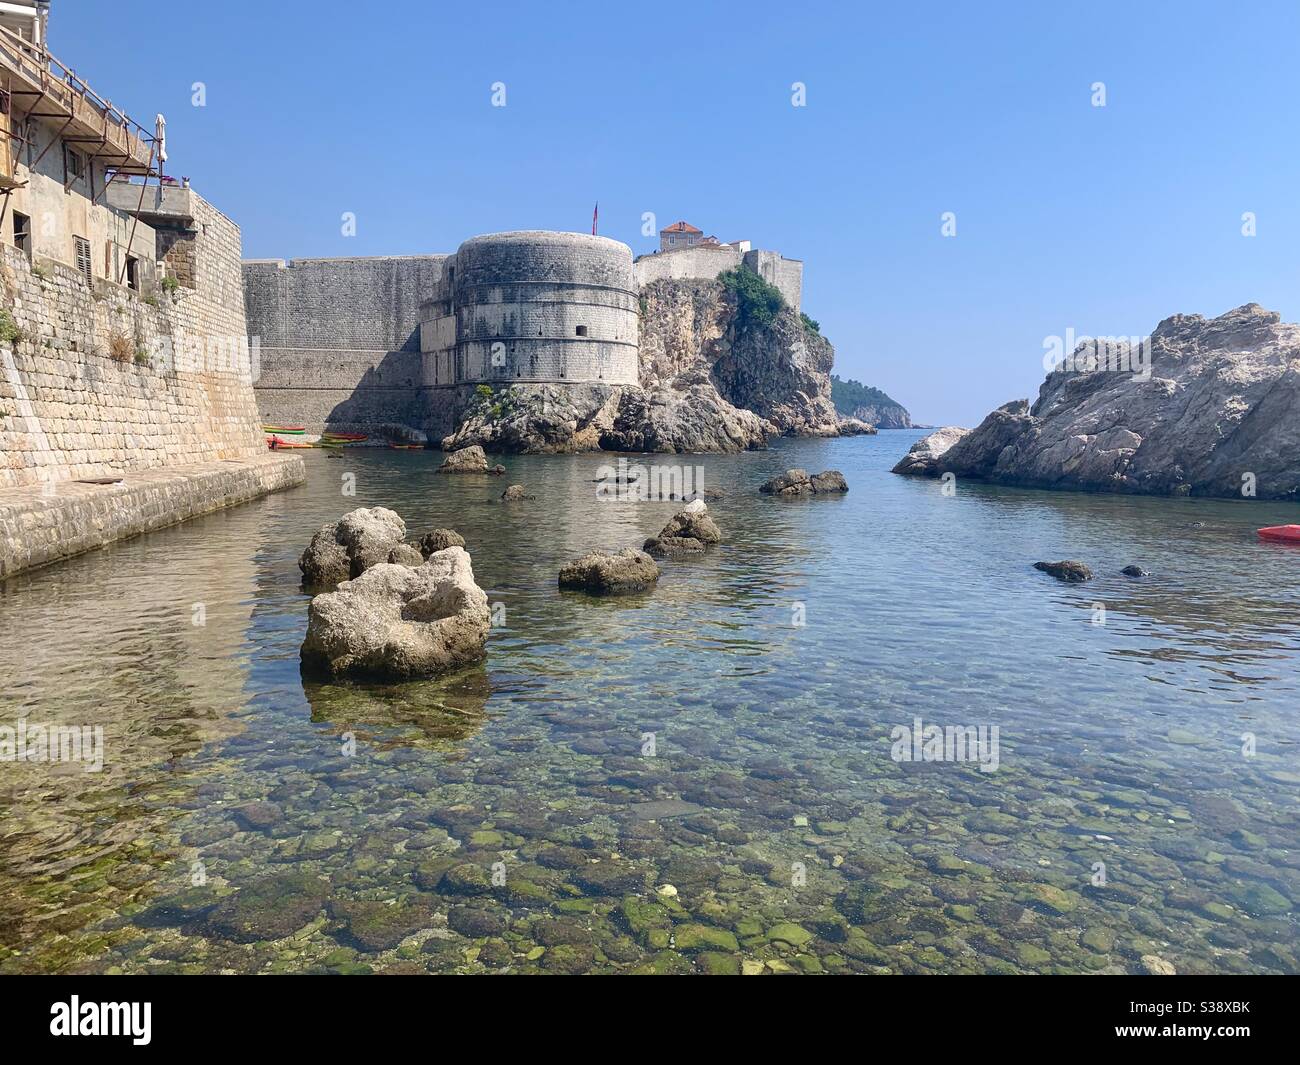 Shallow water around old town at Dubrovnik Stock Photo